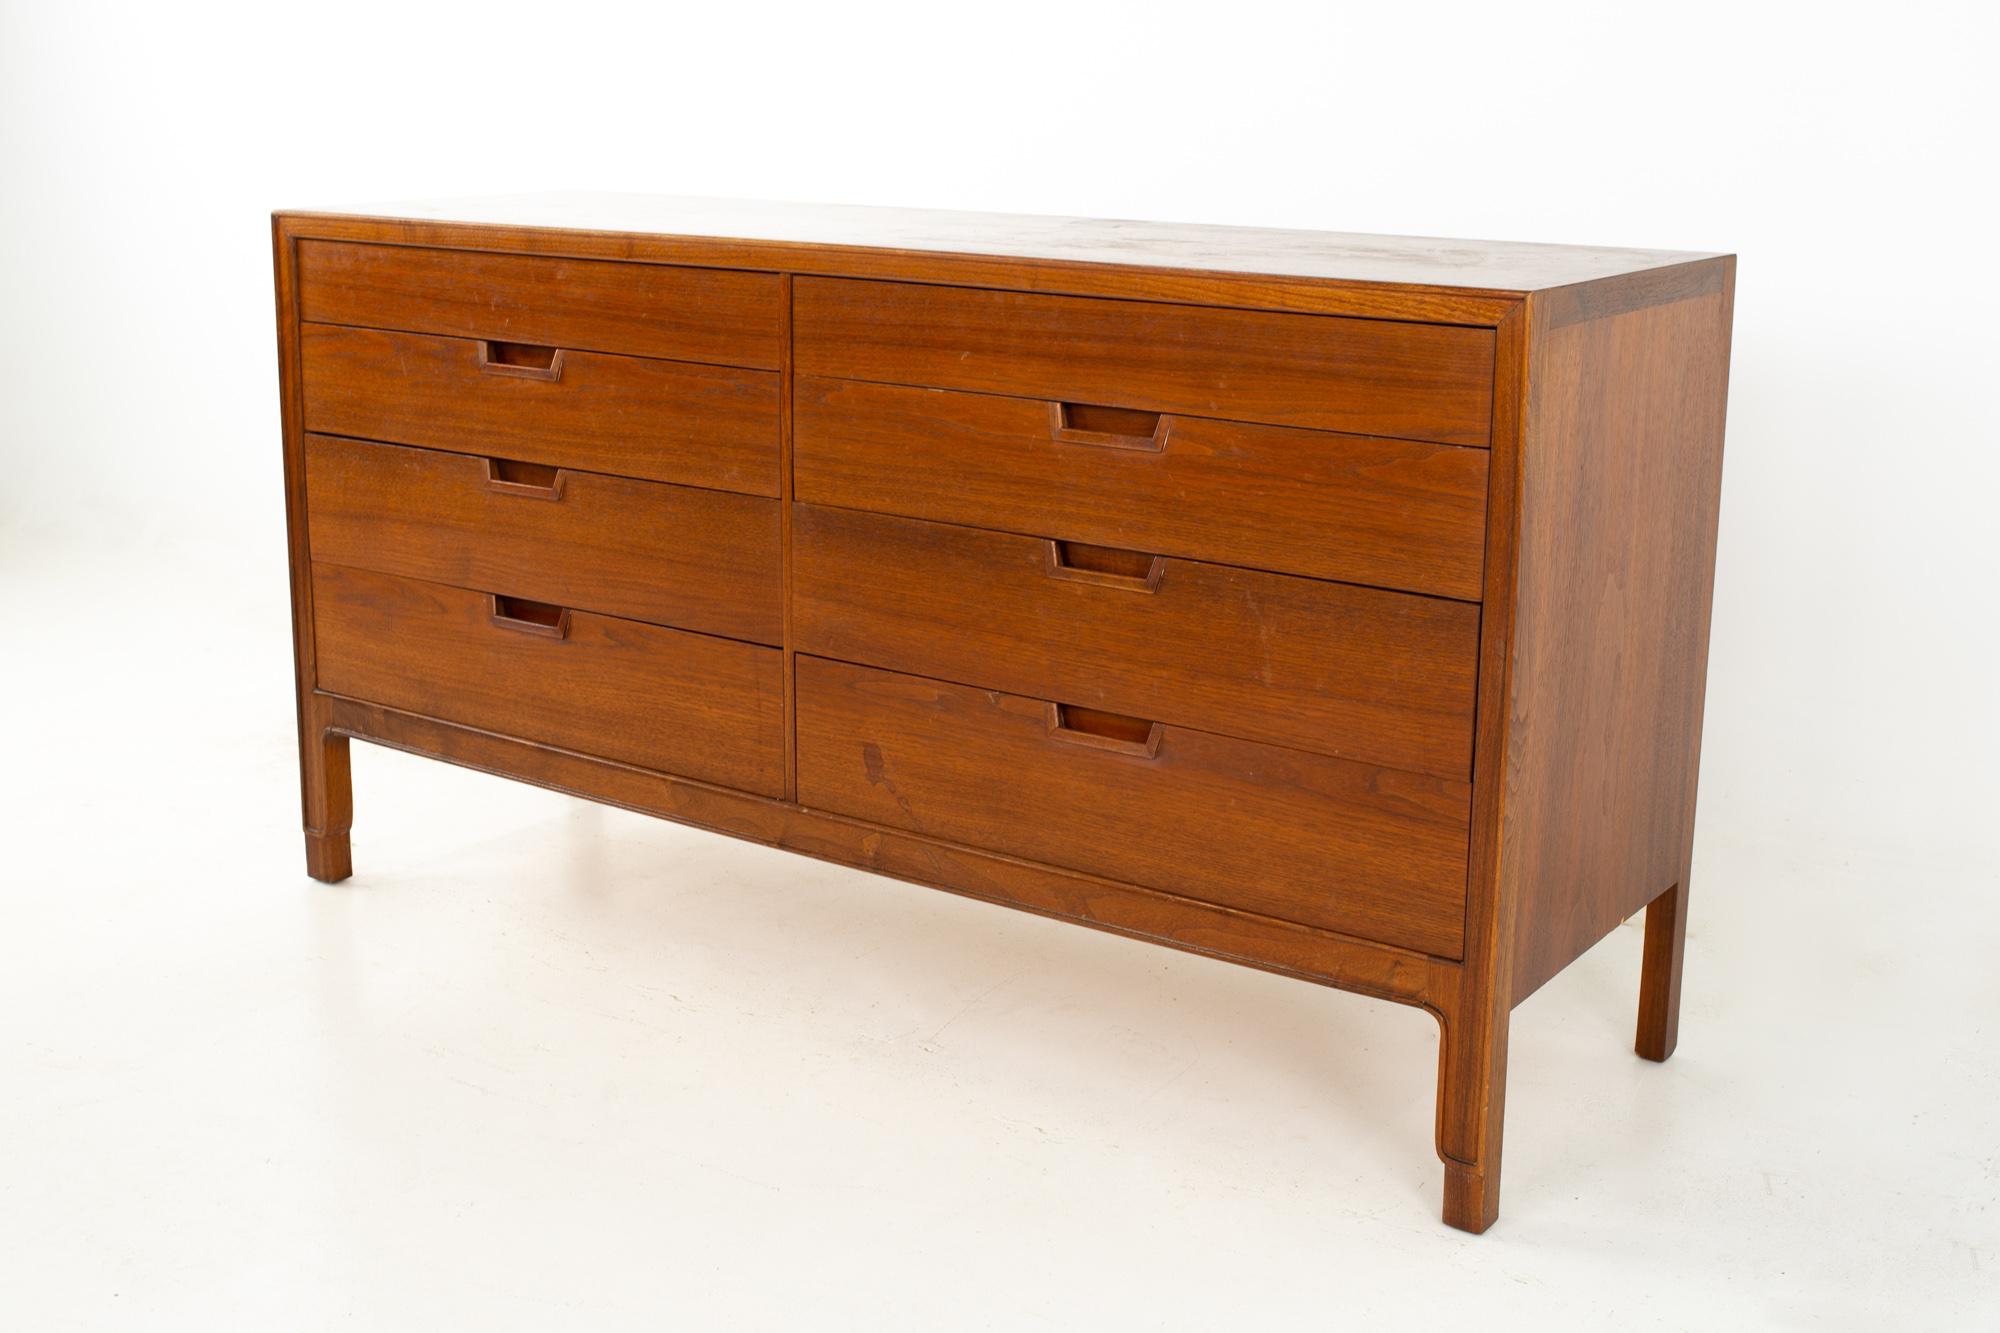 Mount Airy Janus mid century lowboy dresser
Dresser measures: 59.75 wide x 19 deep x 31.5 inches high

All pieces of furniture can be had in what we call restored vintage condition. That means the piece is restored upon purchase so it’s free of